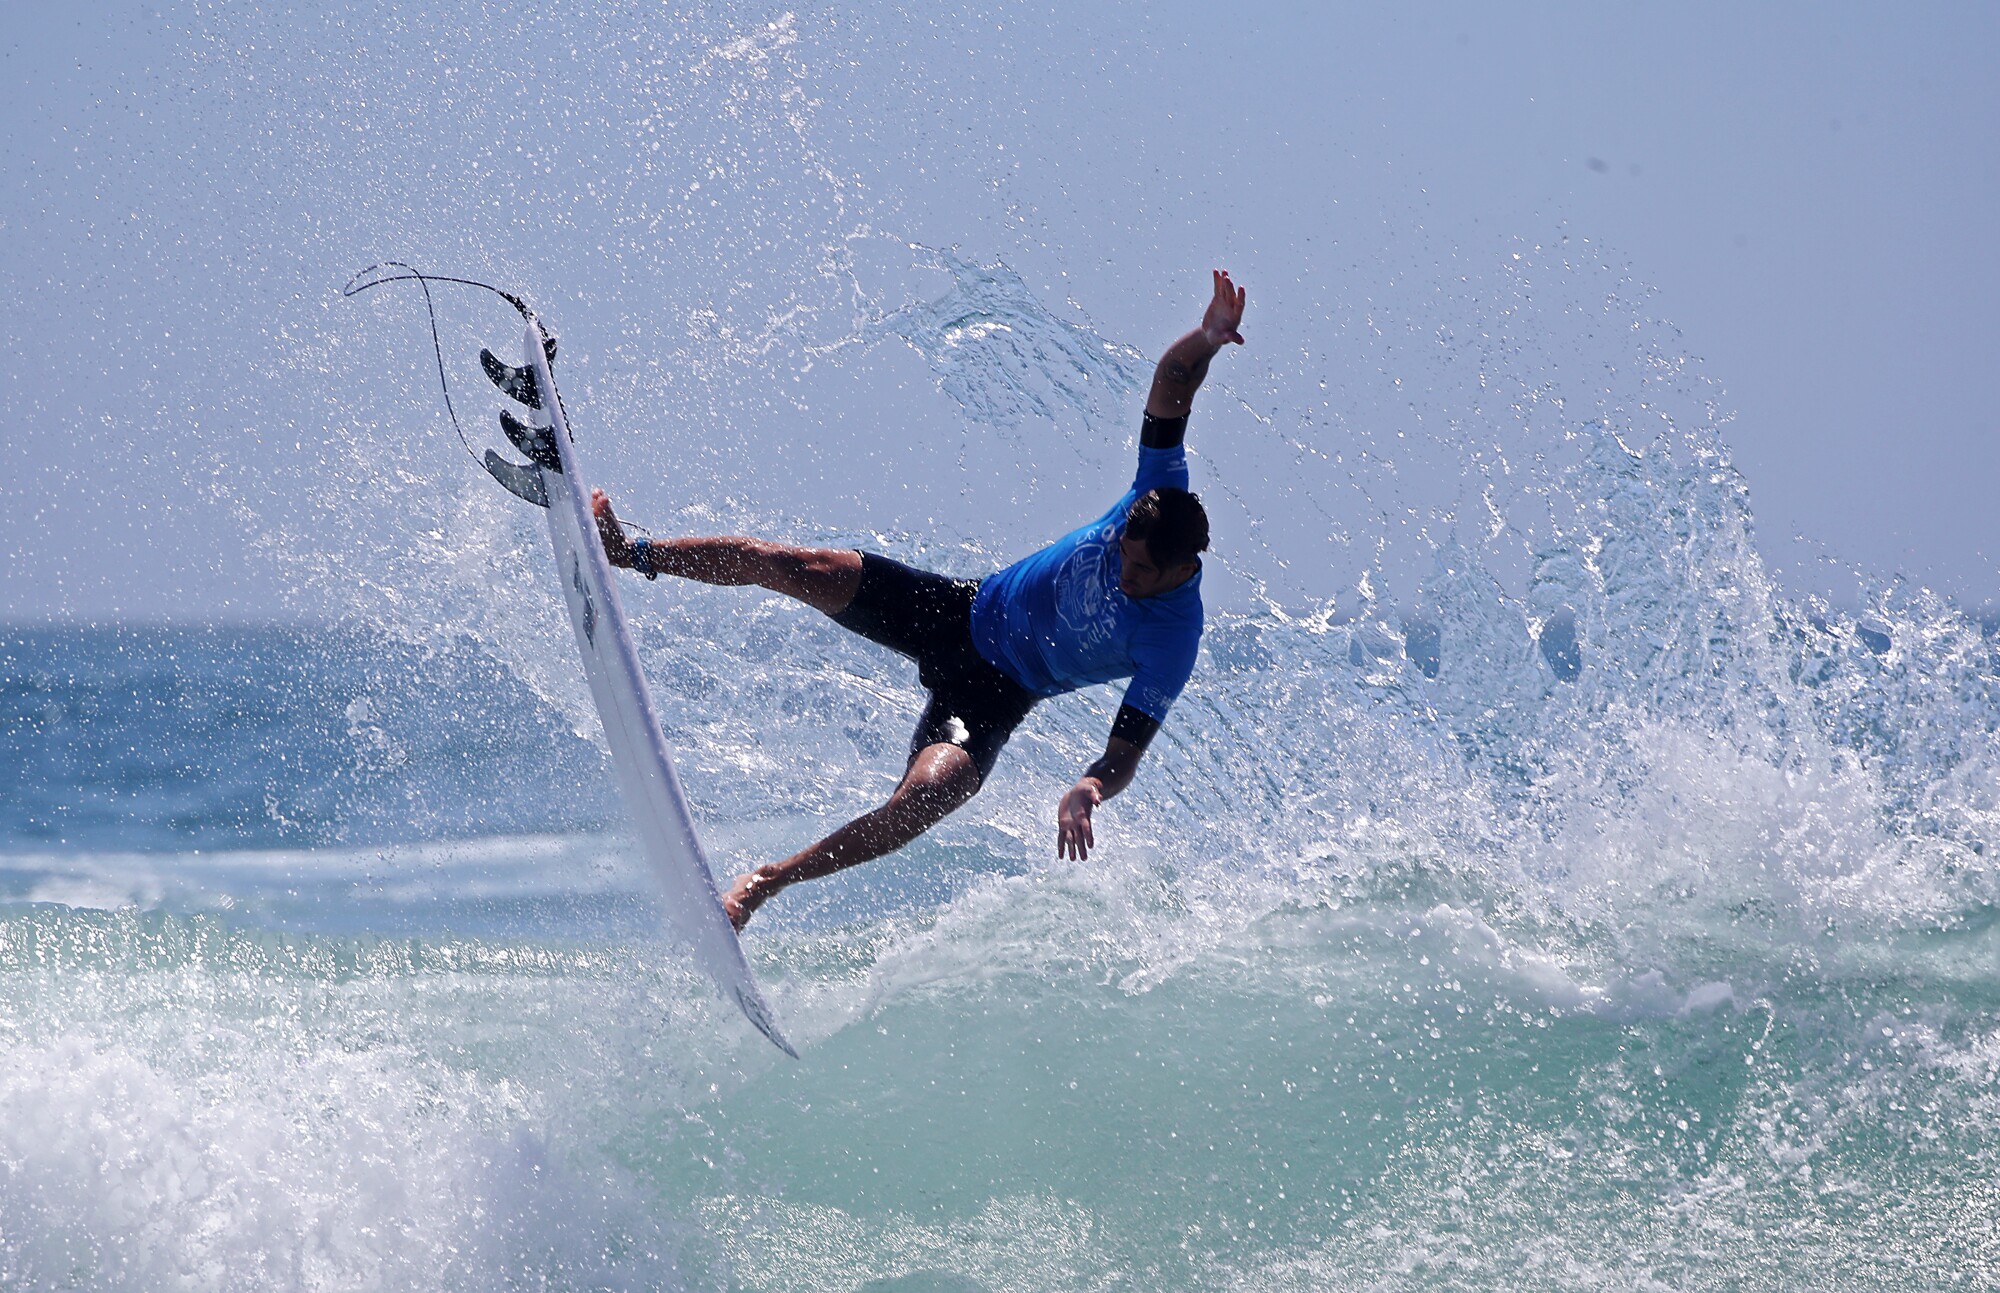 Joao Chianca of Brazil gets airborne during the Finals of the U.S. Open of Surfing.